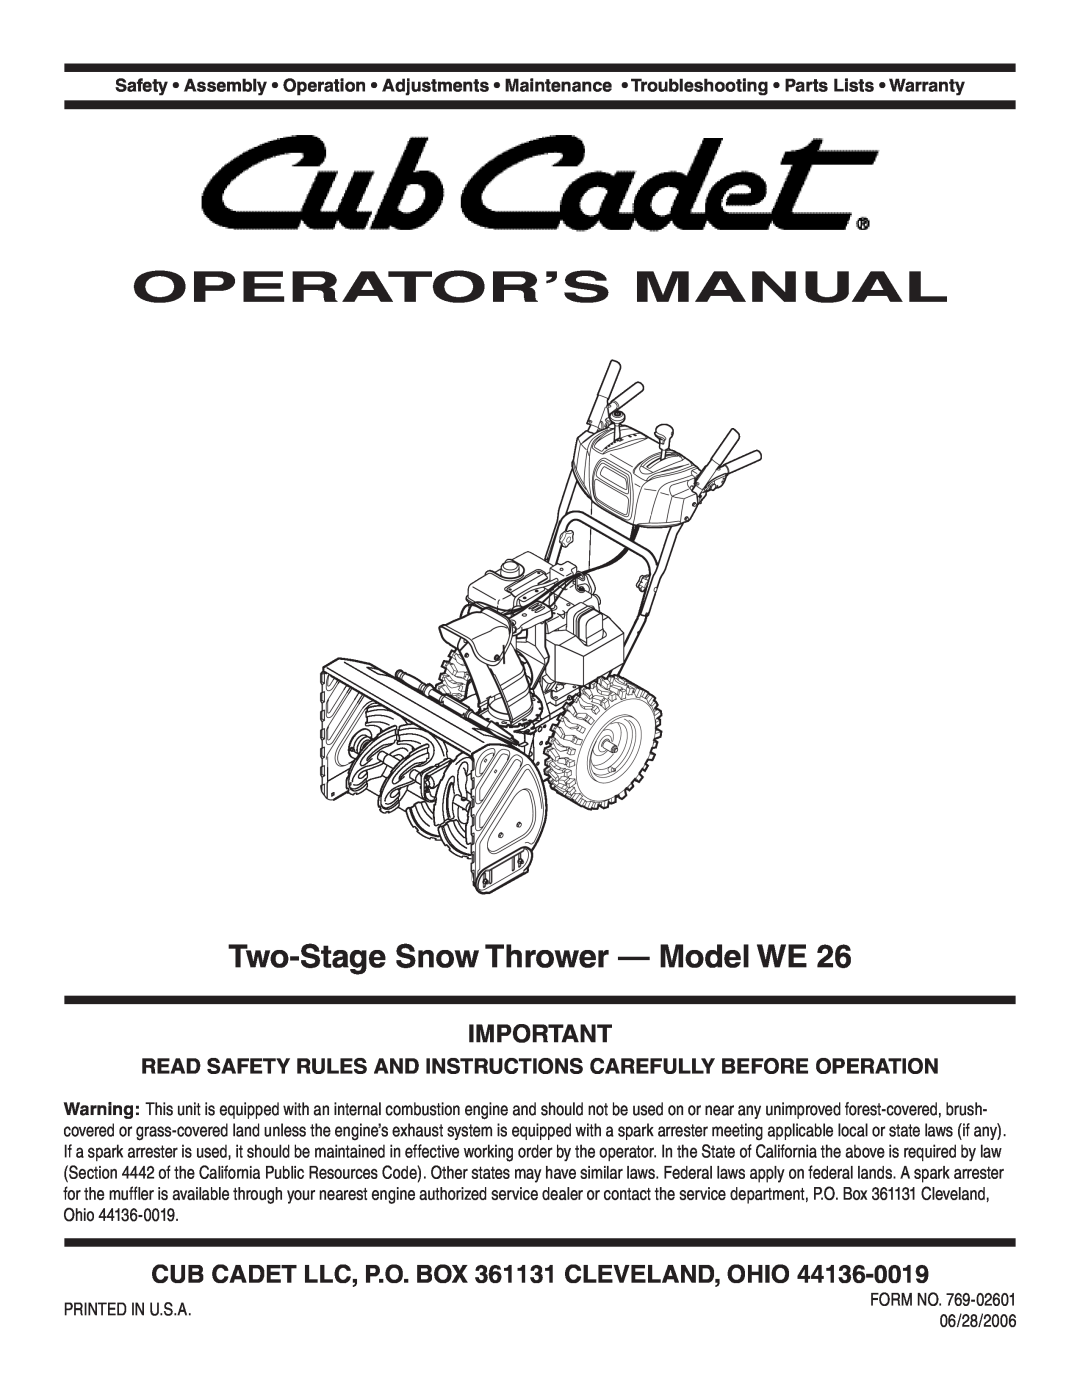 Cub Cadet WE 26 warranty Operator’S Manual, Two-StageSnow Thrower — Model WE 